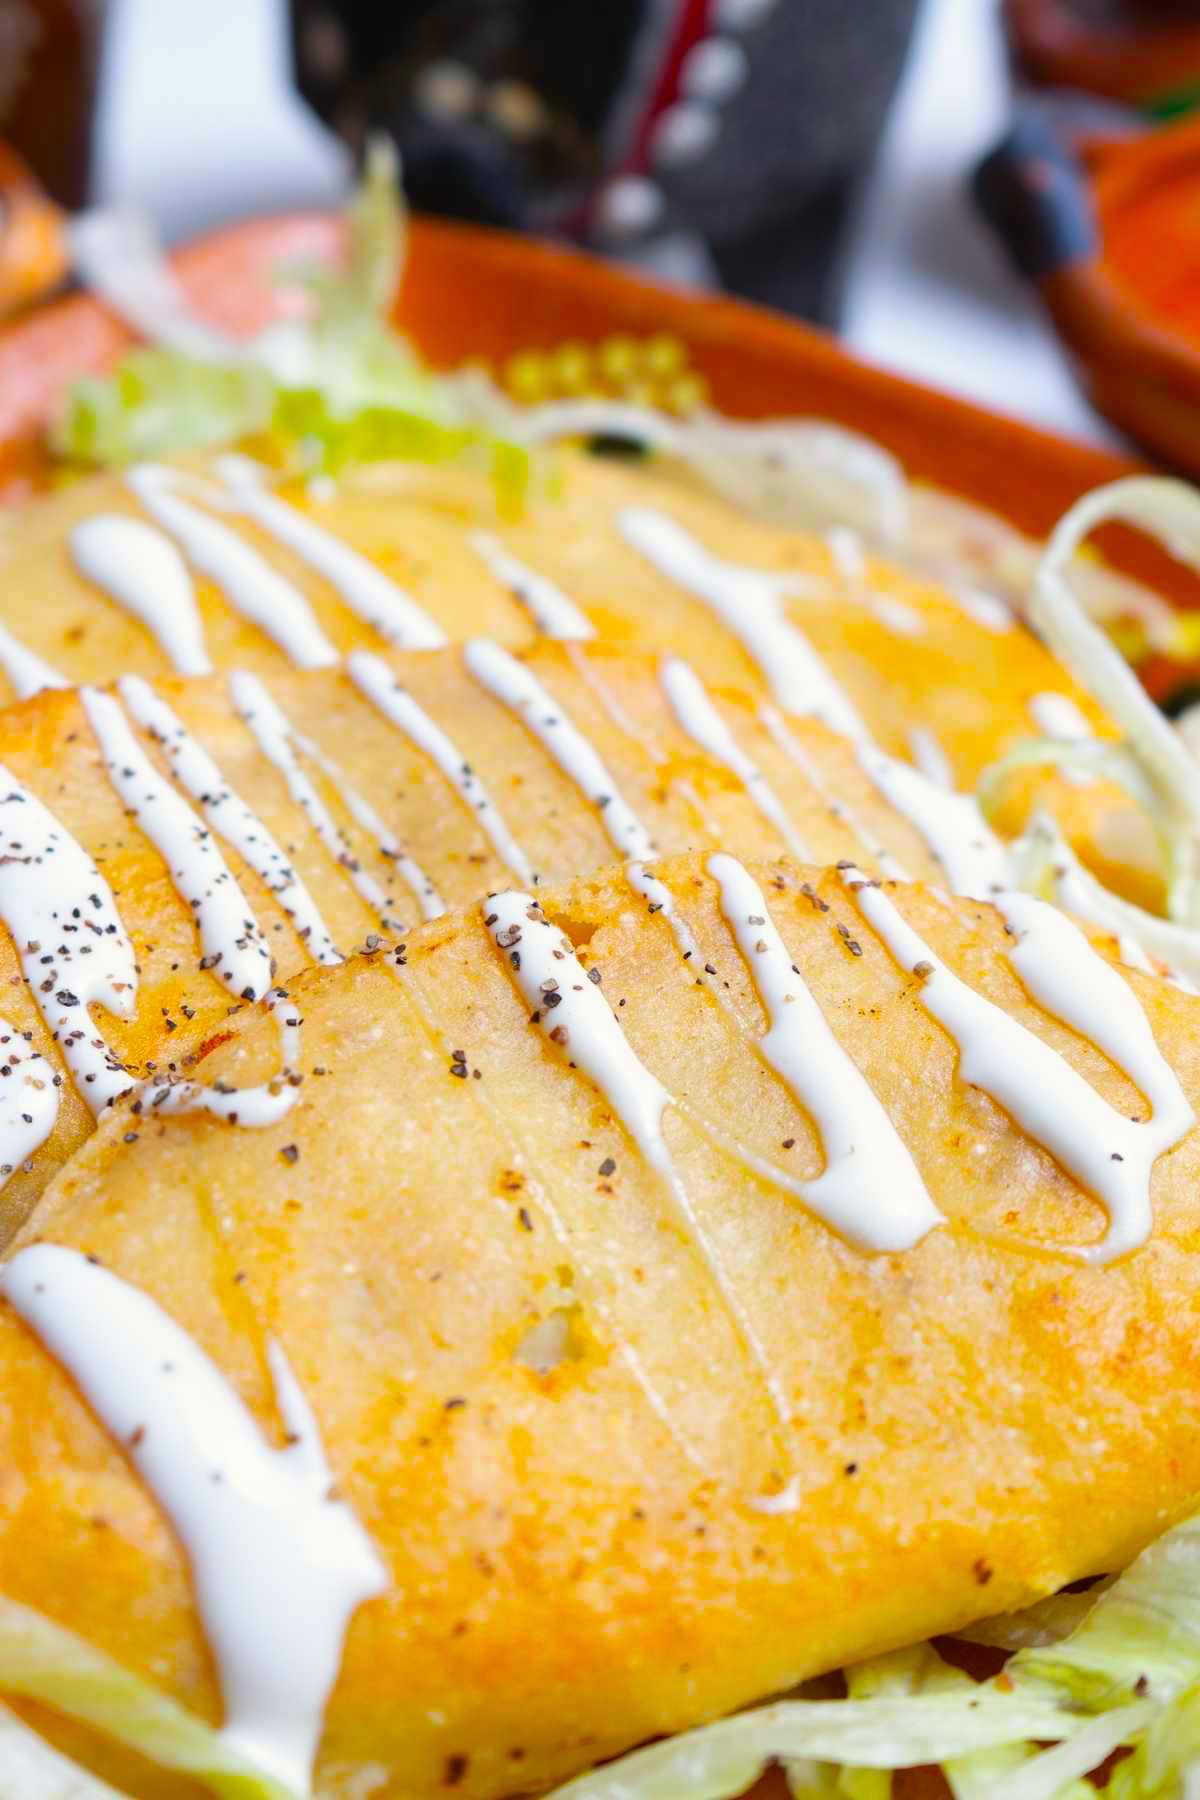 If you love the flavor of crispy, fried tortillas, you have to try taco dorados! This popular Mexican dish is easy to make in your own kitchen and is sure to become a family favorite!